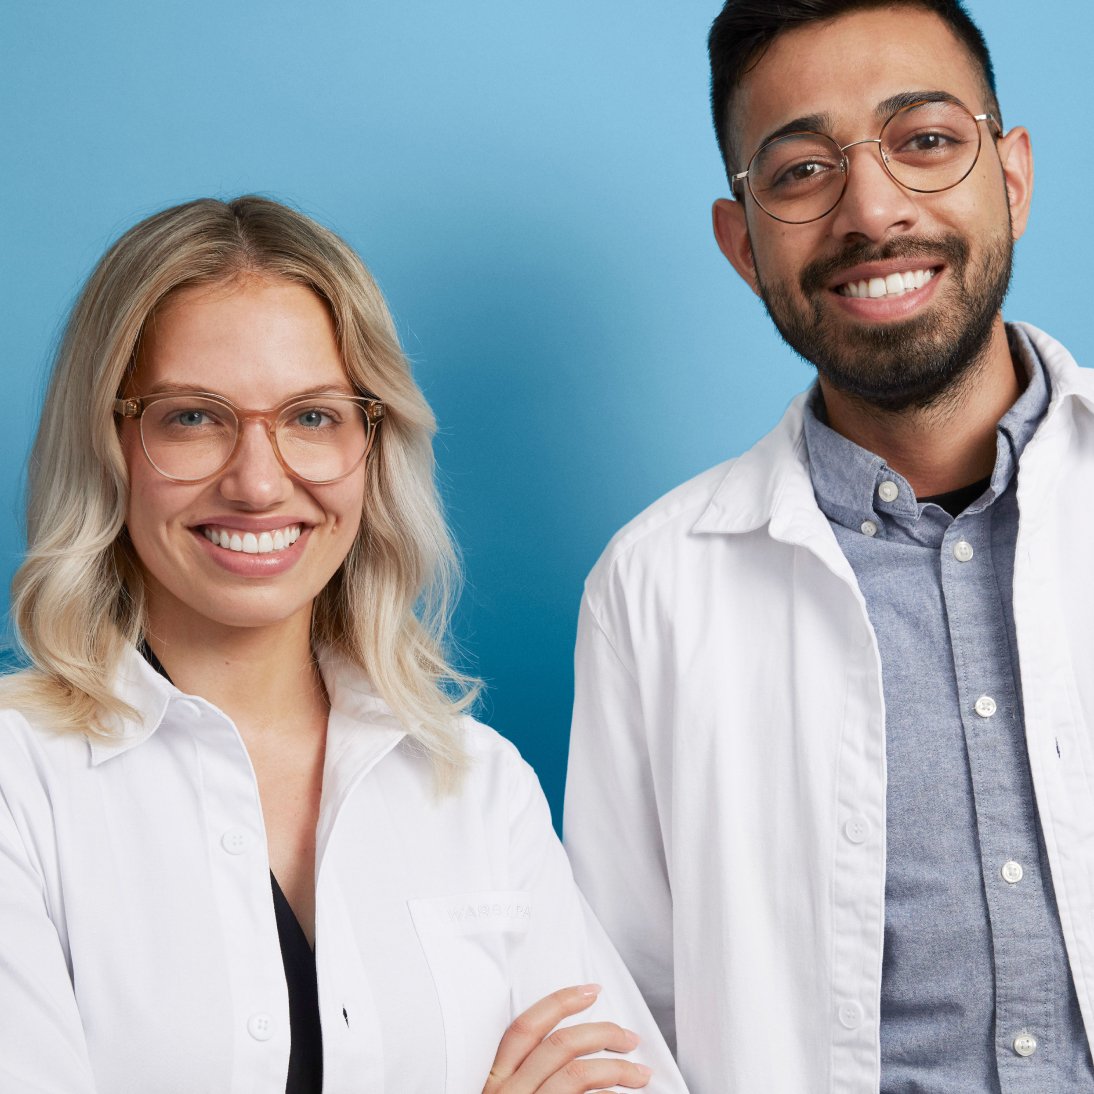 Two smiling optometrists in white coats